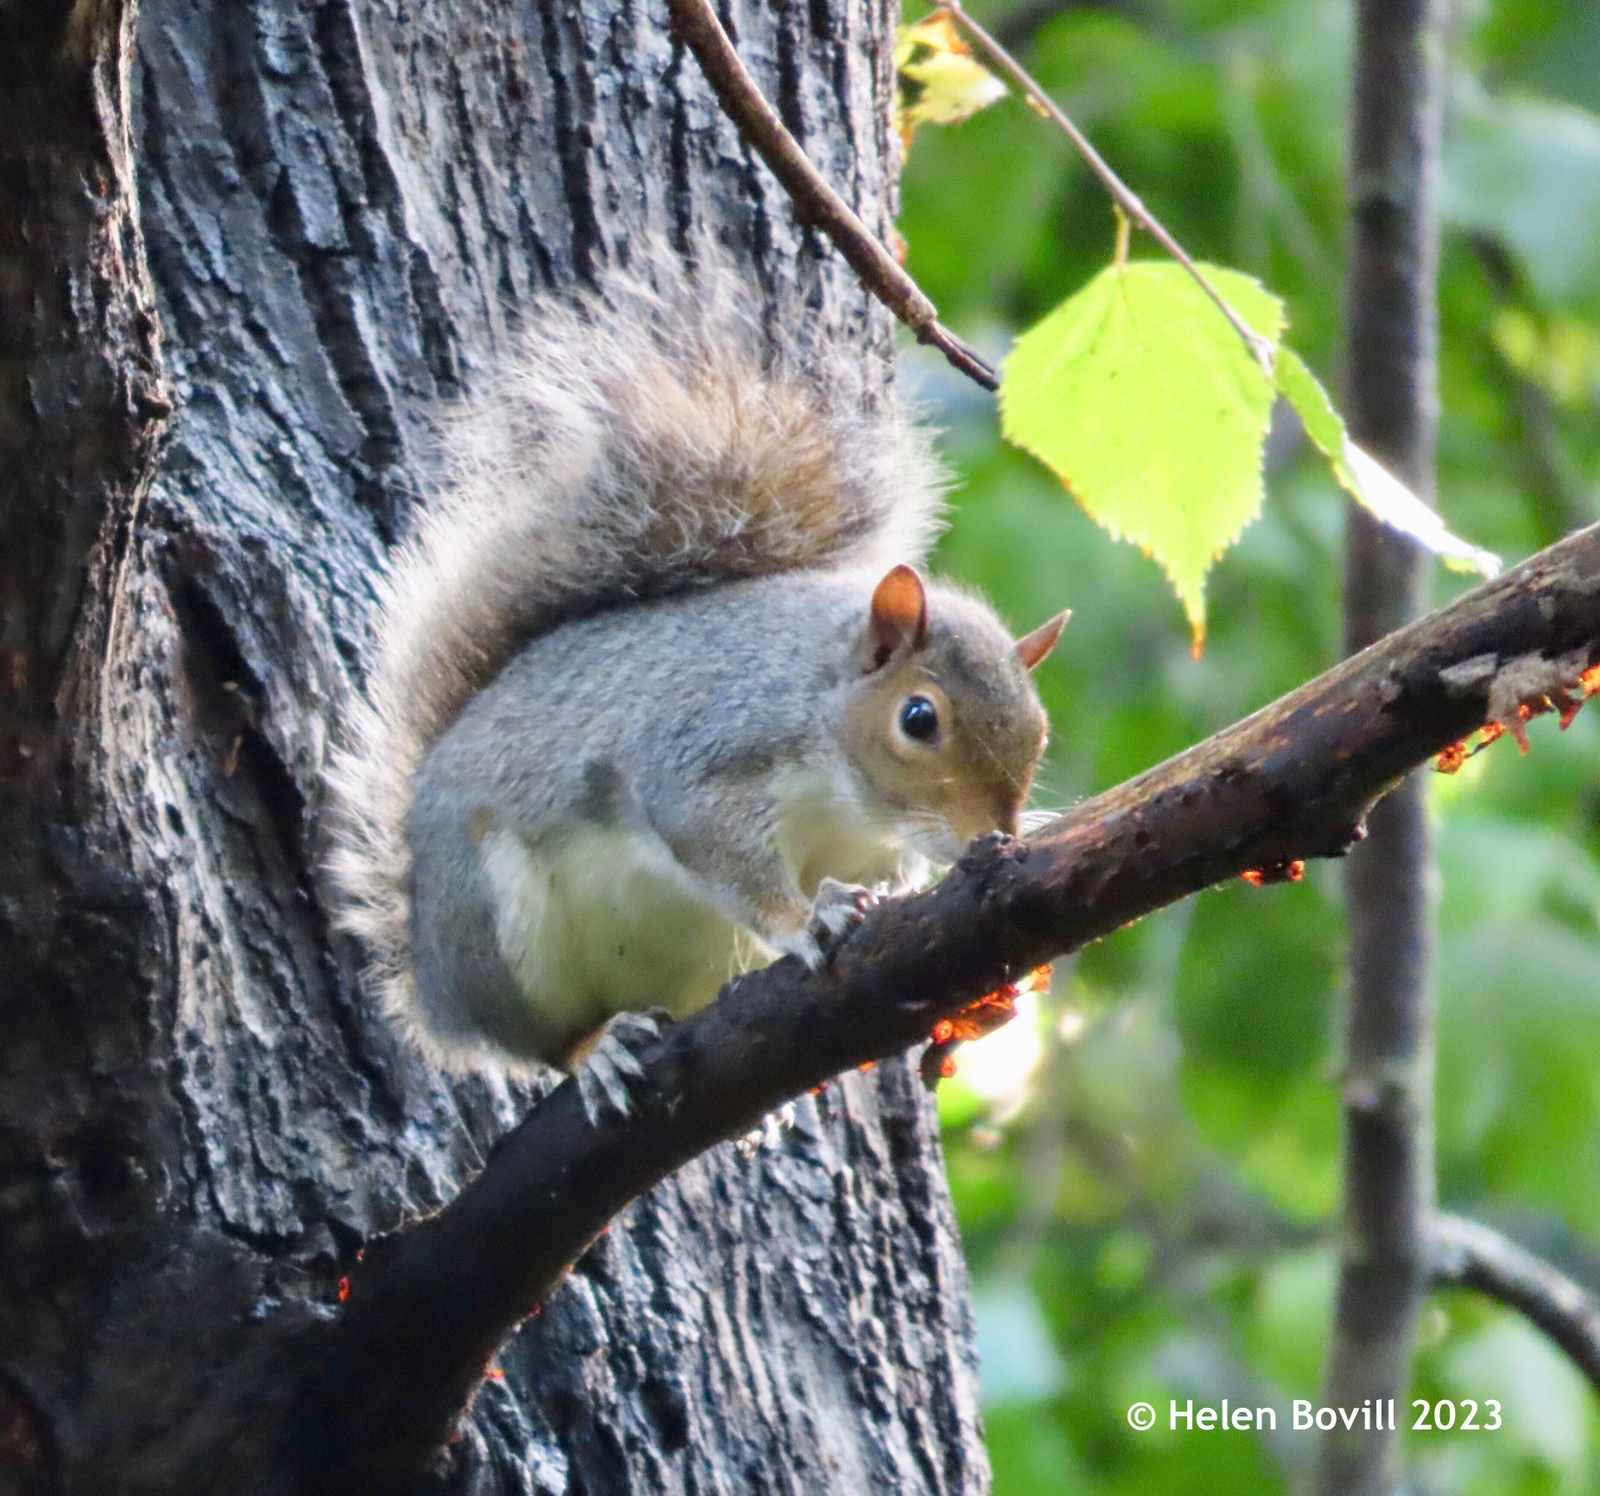 A Grey Squirrel perched high on a wet tree branch